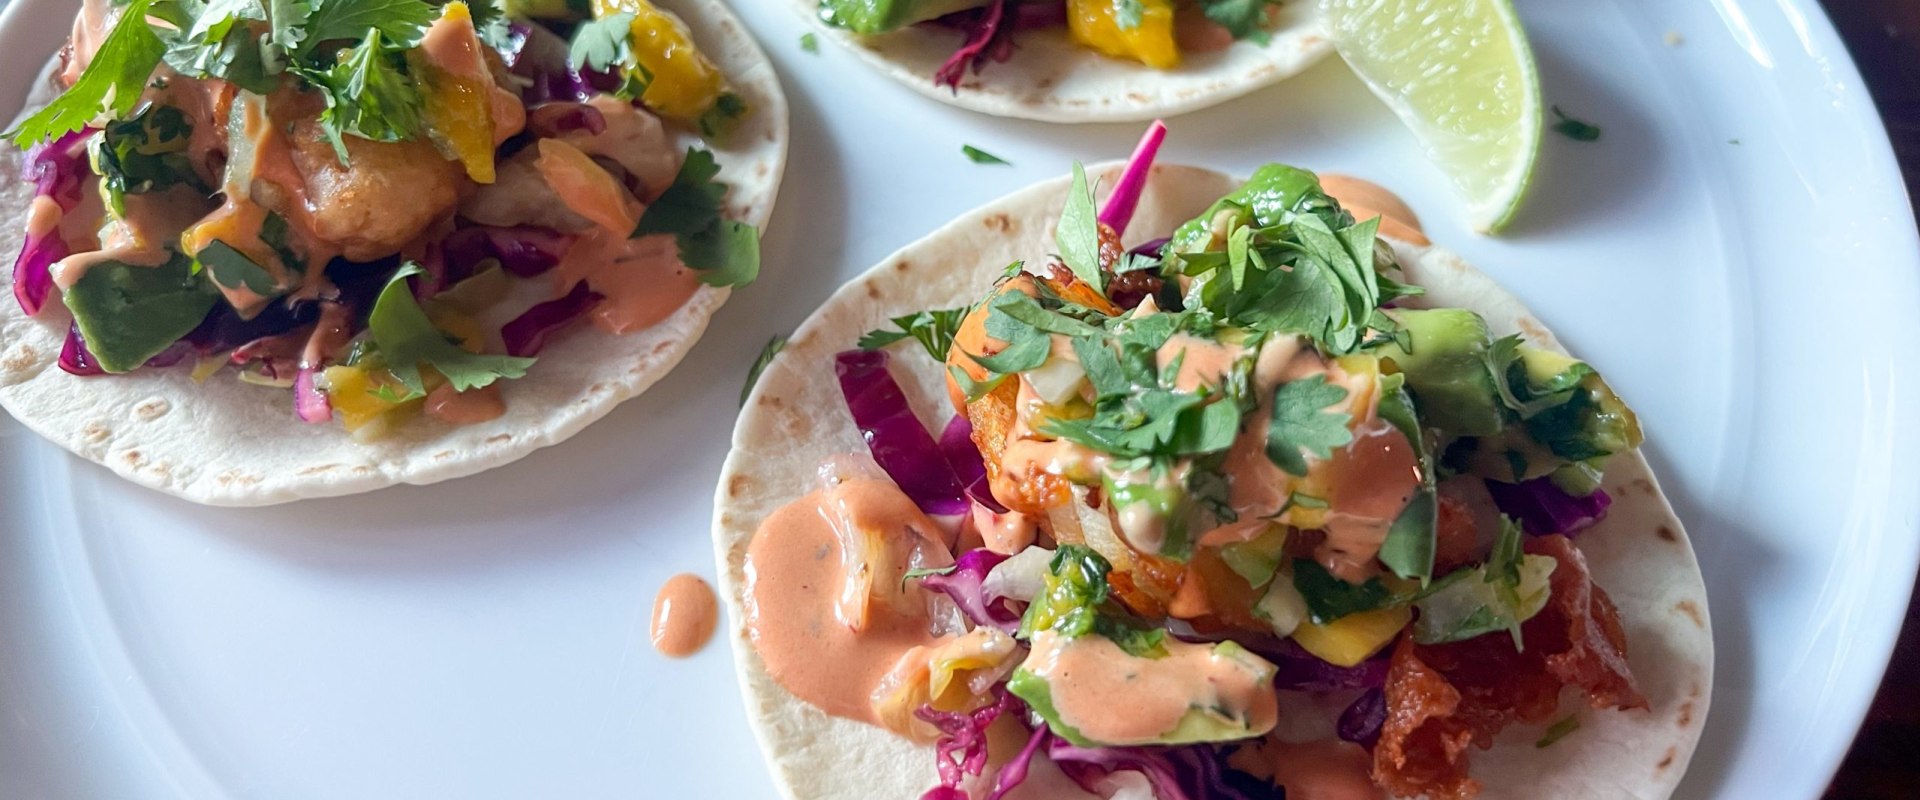 Fish Tacos with Mango Salsa and Avocado Cream Sauce: A Healthy and Delicious Seafood Dinner Idea for Kids